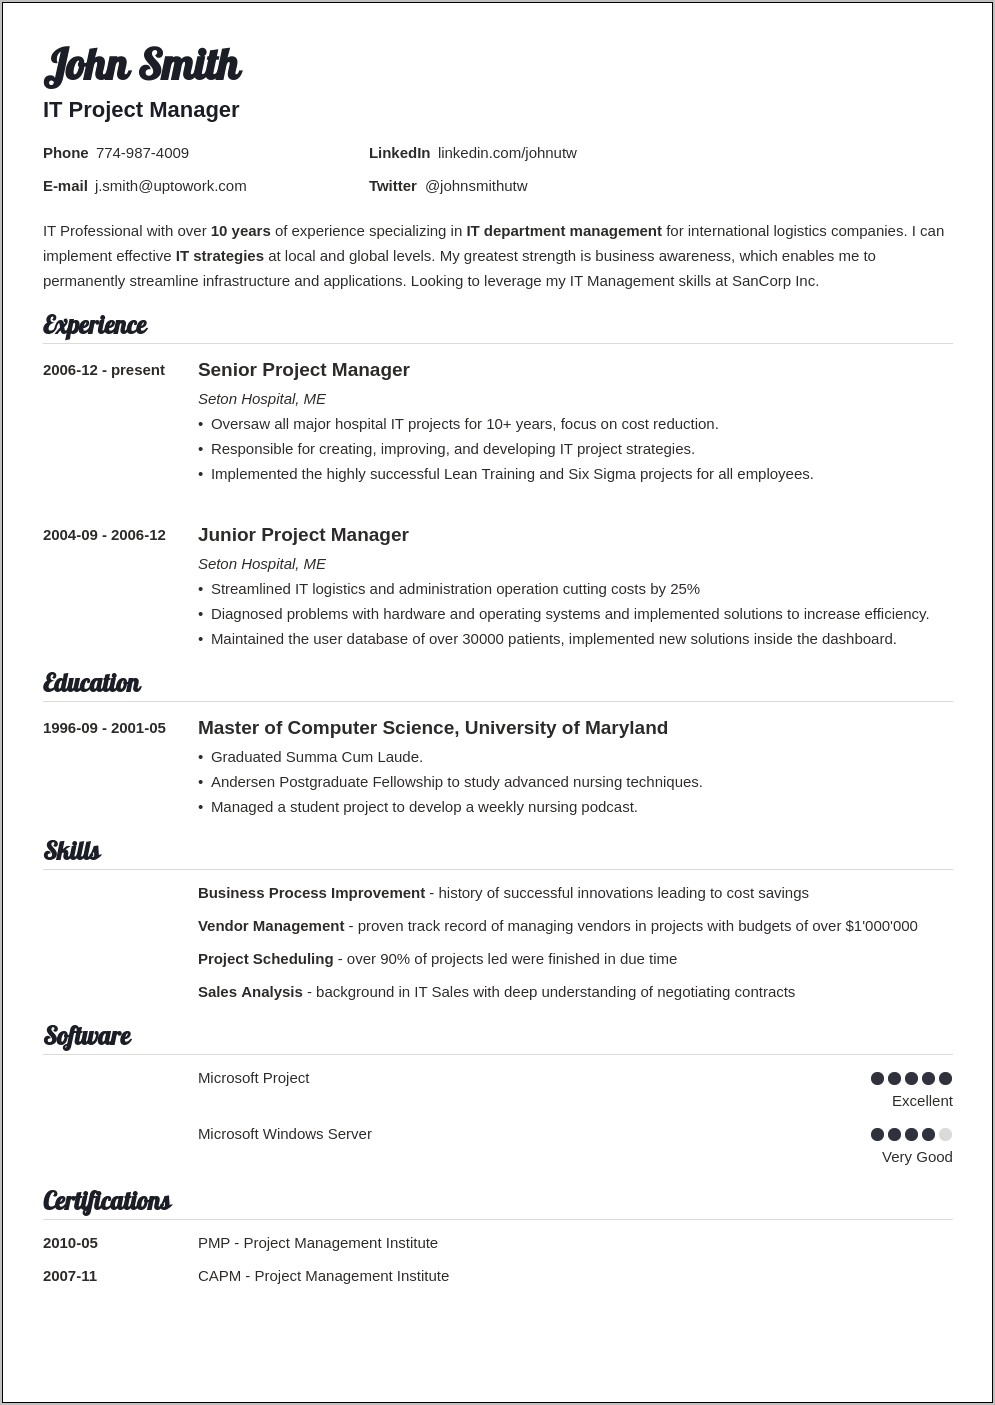 Copy Paste Things From Job Description In Resume